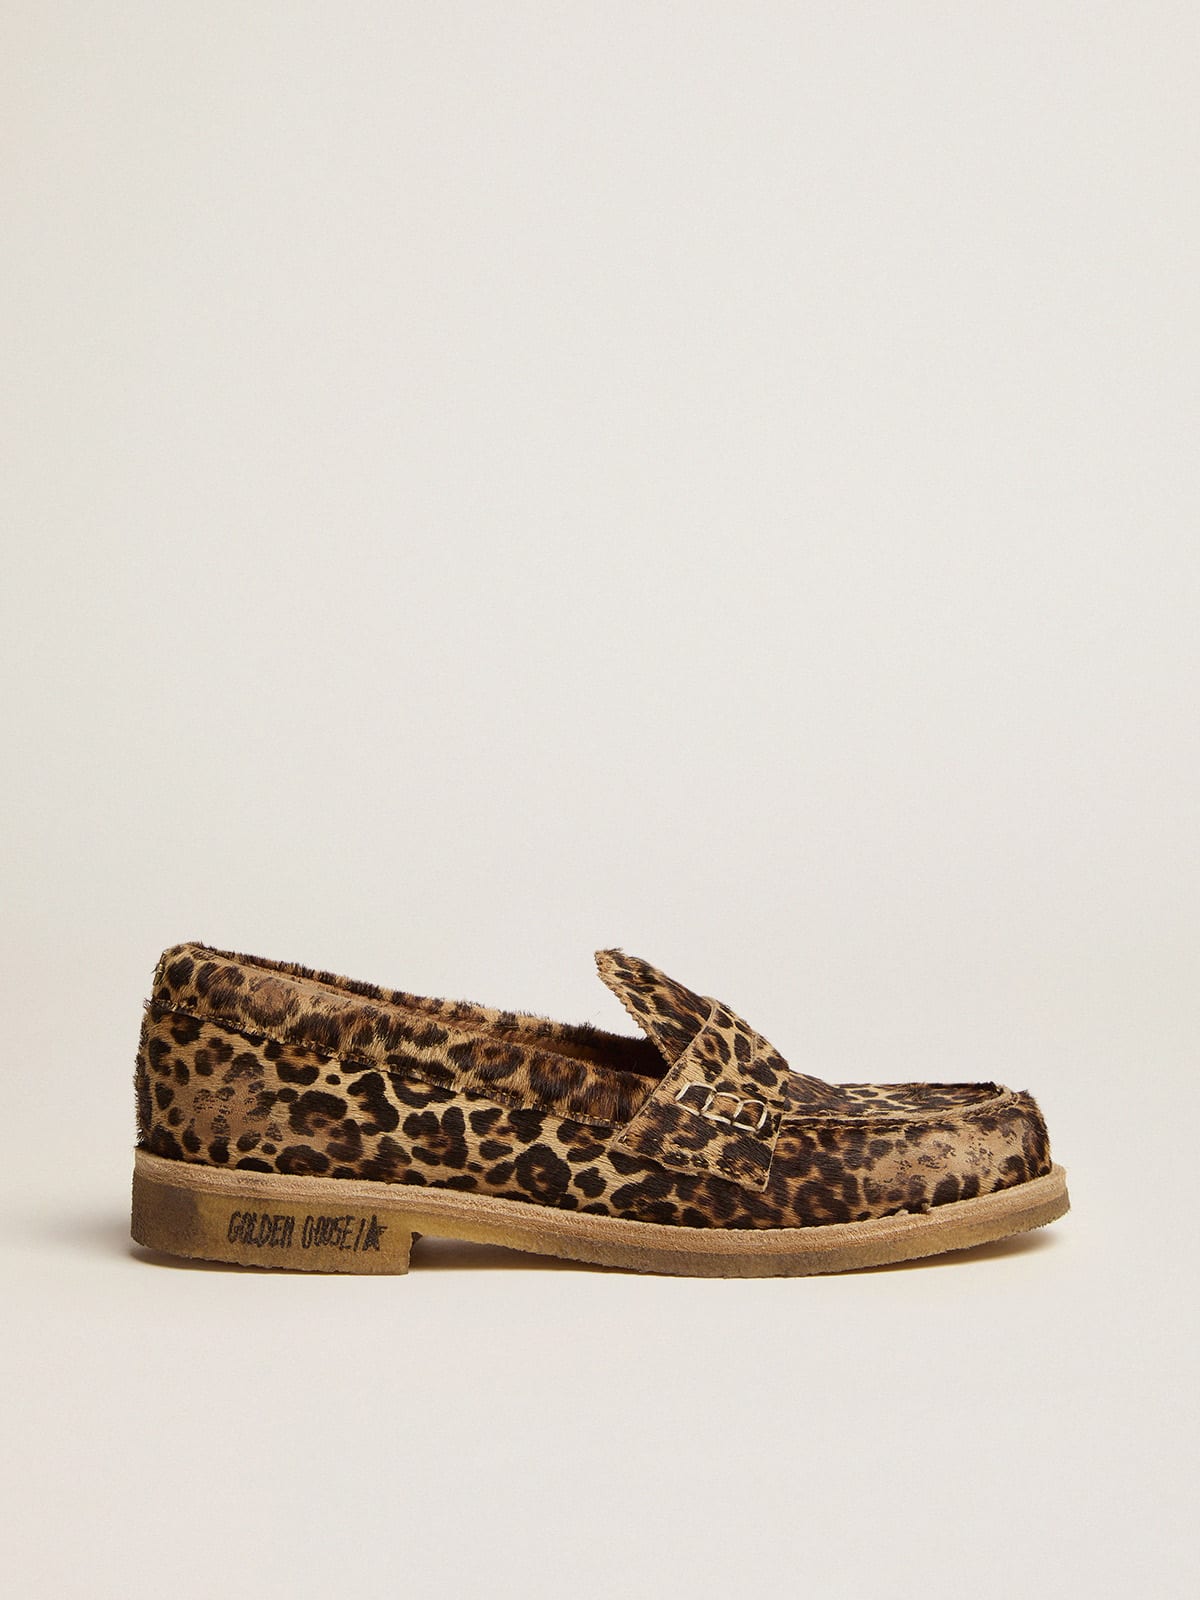 Jerry loafers in leopard-print pony skin